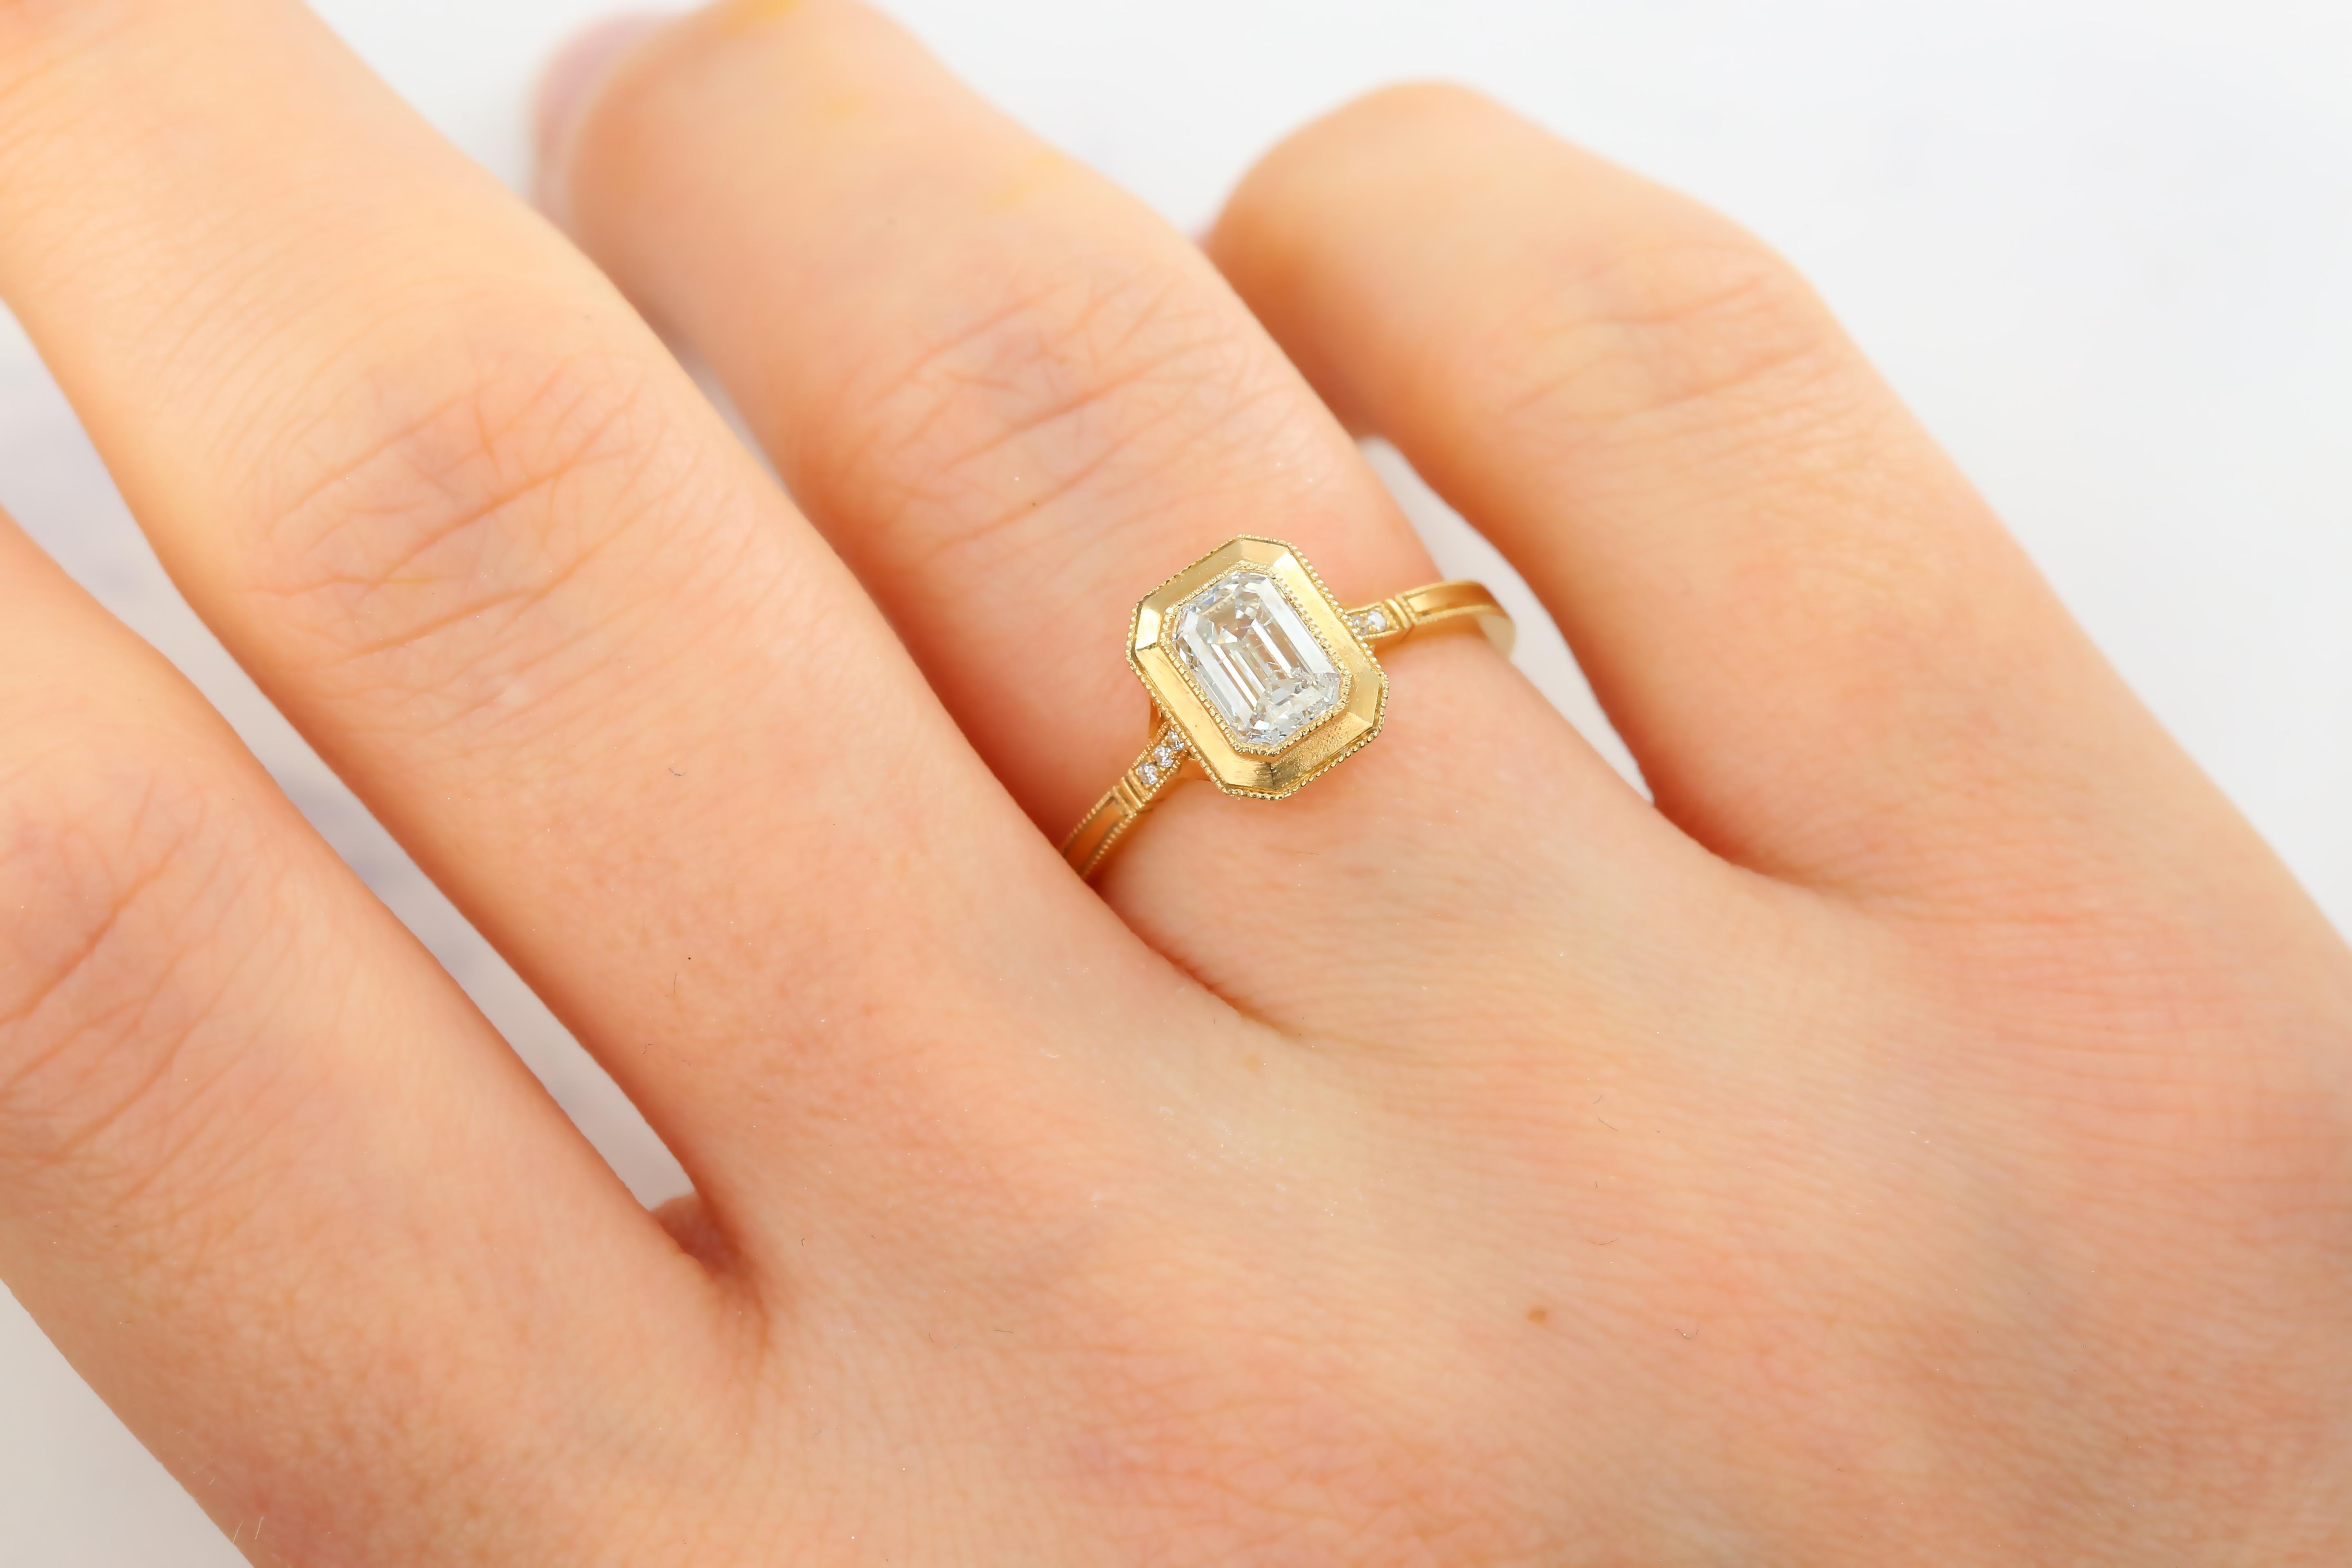 Vintage Style 0.72 Ct Emerald Cut Diamond Engagement Ring, 14K Solitaire Ring, created by hands from ring to the stone shapes. Good ideas of statement ring or engagement ring gift for her.

I used brillant emerald cut diamond in vintage style for